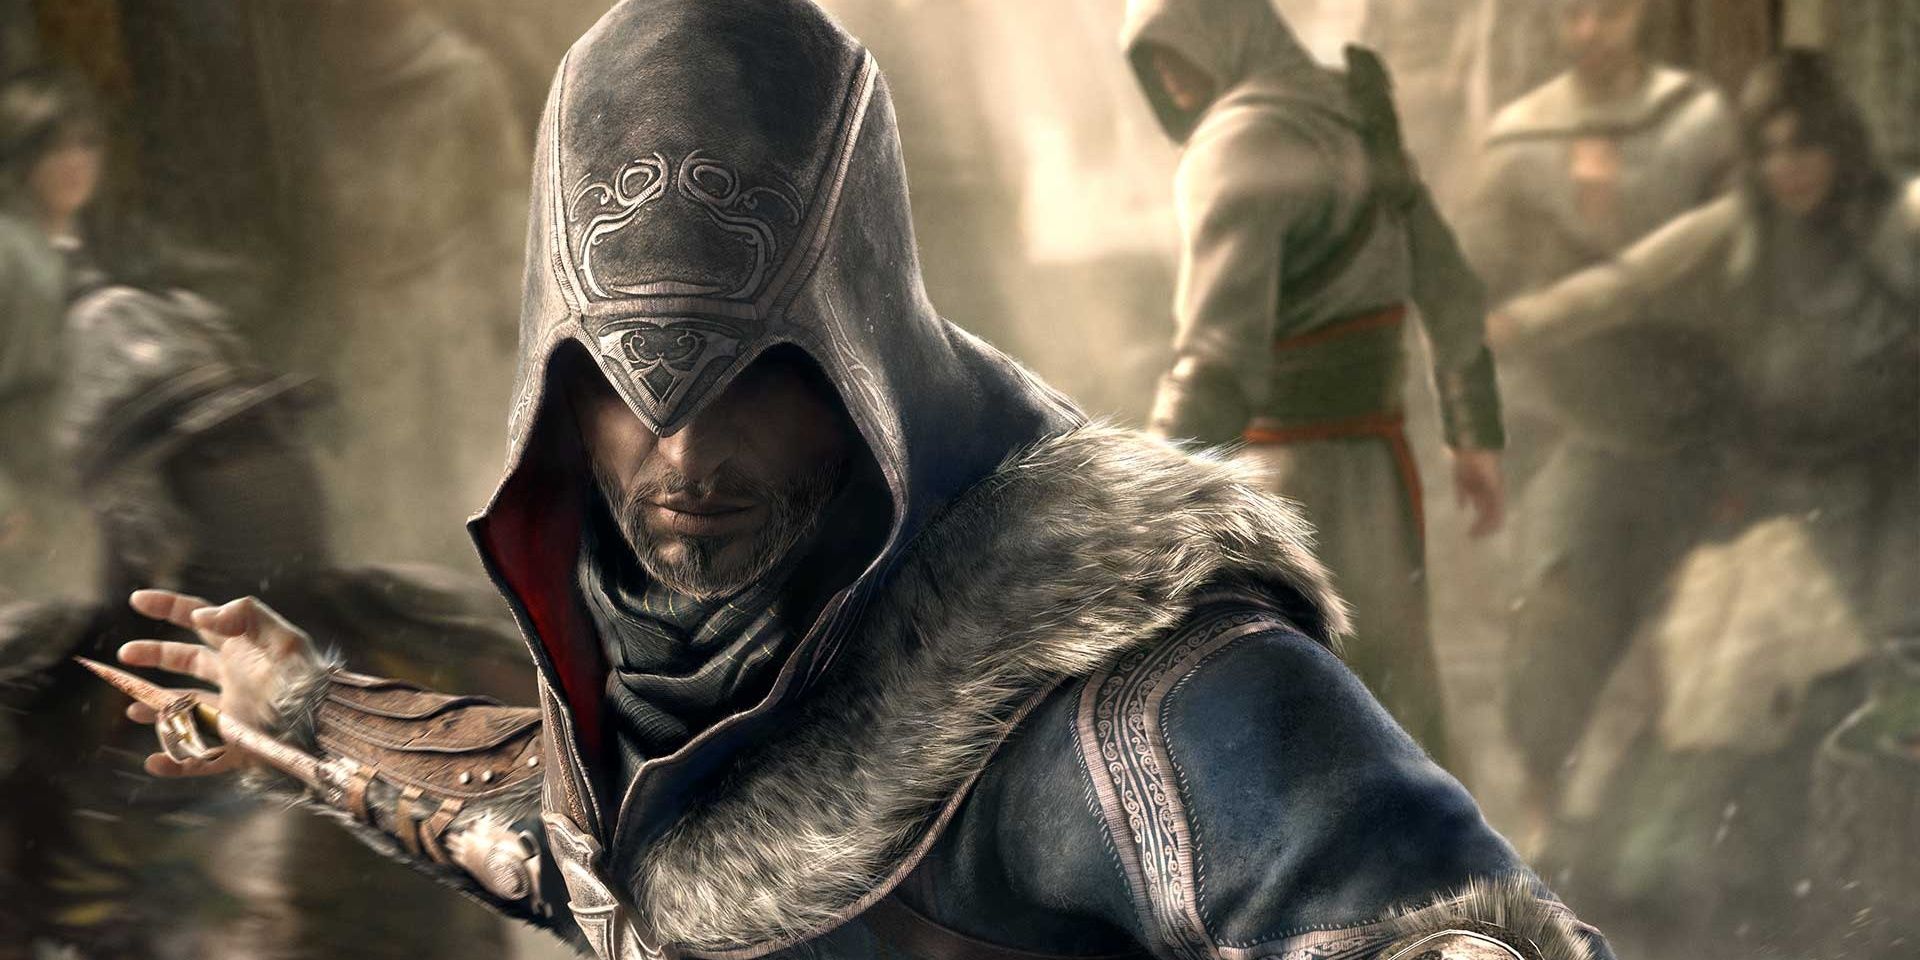 Ezio takes out the hidden blake in Assassin's Creed Revelations 